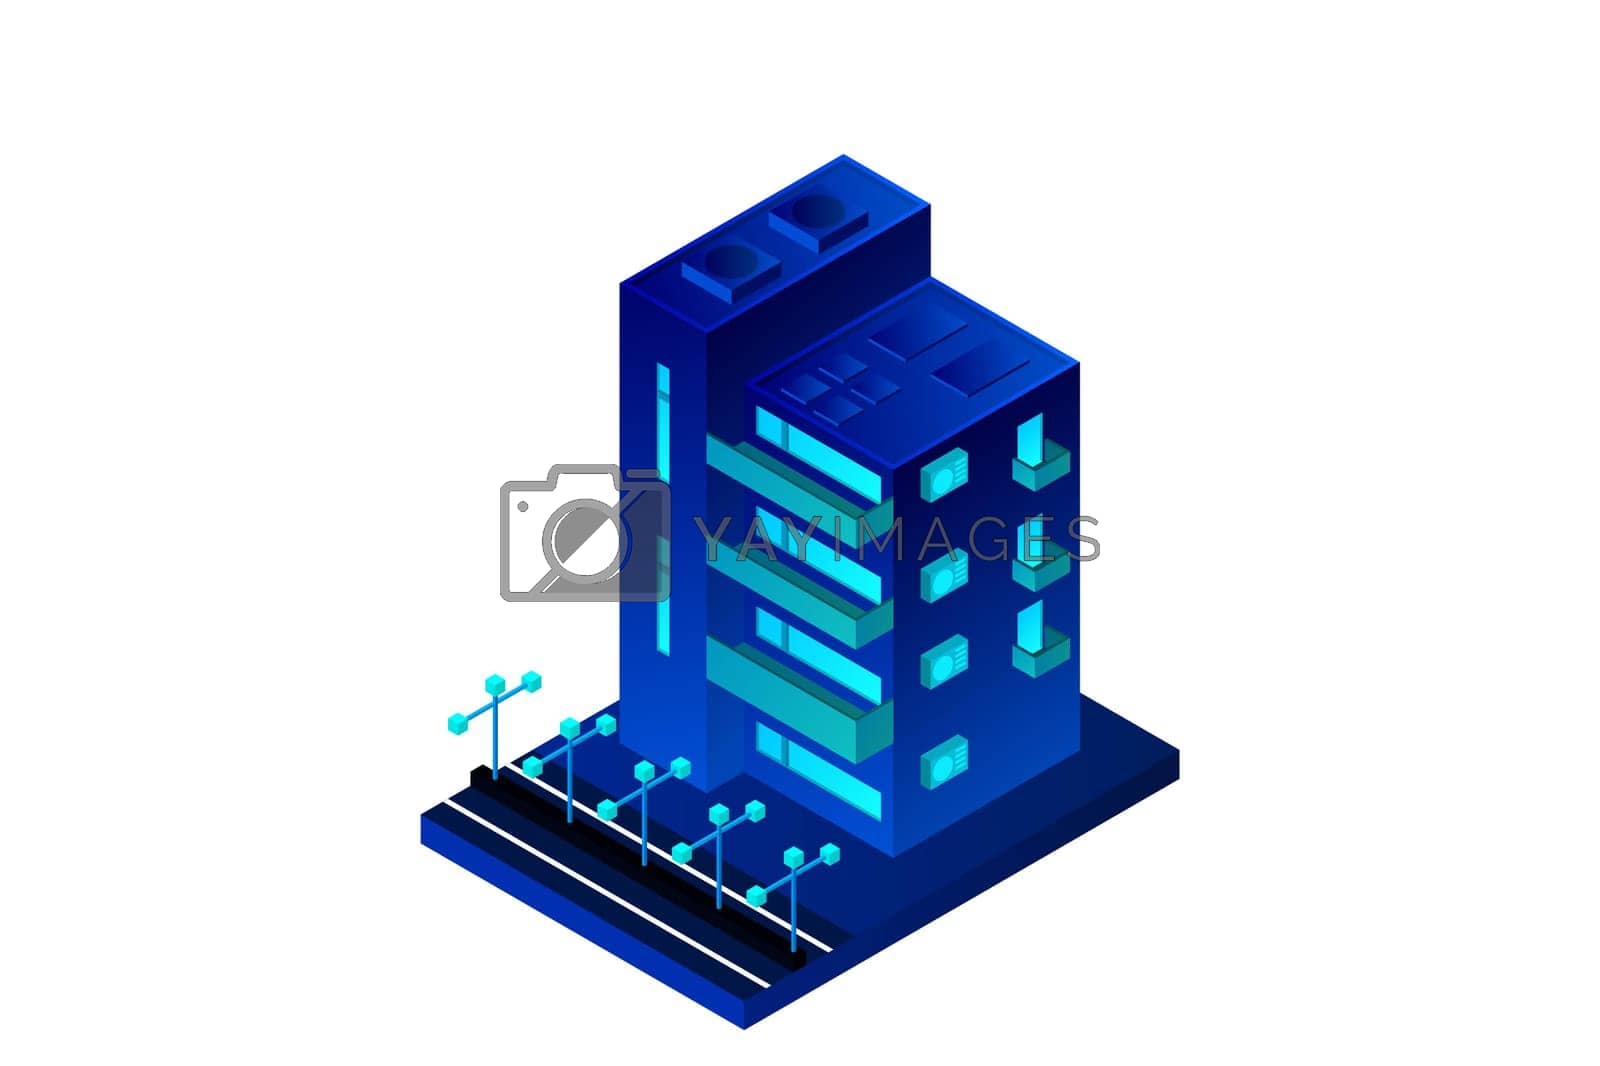 Royalty free image of Smart city or intelligent building isometric vector concept. Modern smart city urban planning and development infrastructure buildings by Aozora